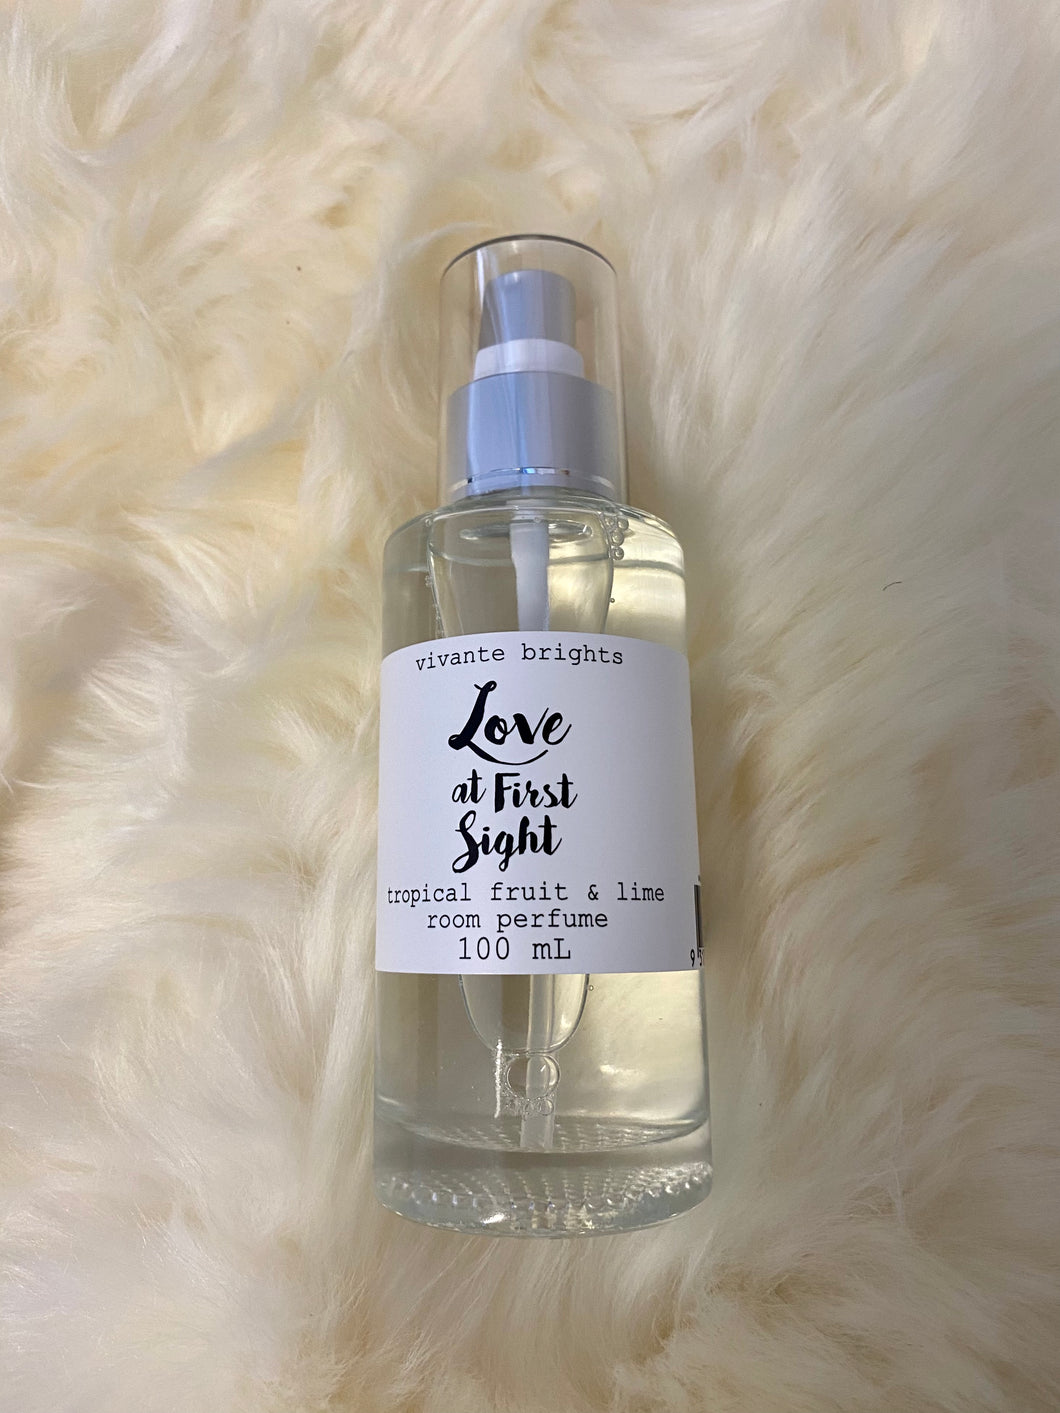 Vivante Brights 'Love at First Sight' Tropical Fruit & Lime Room Perfume 100ml